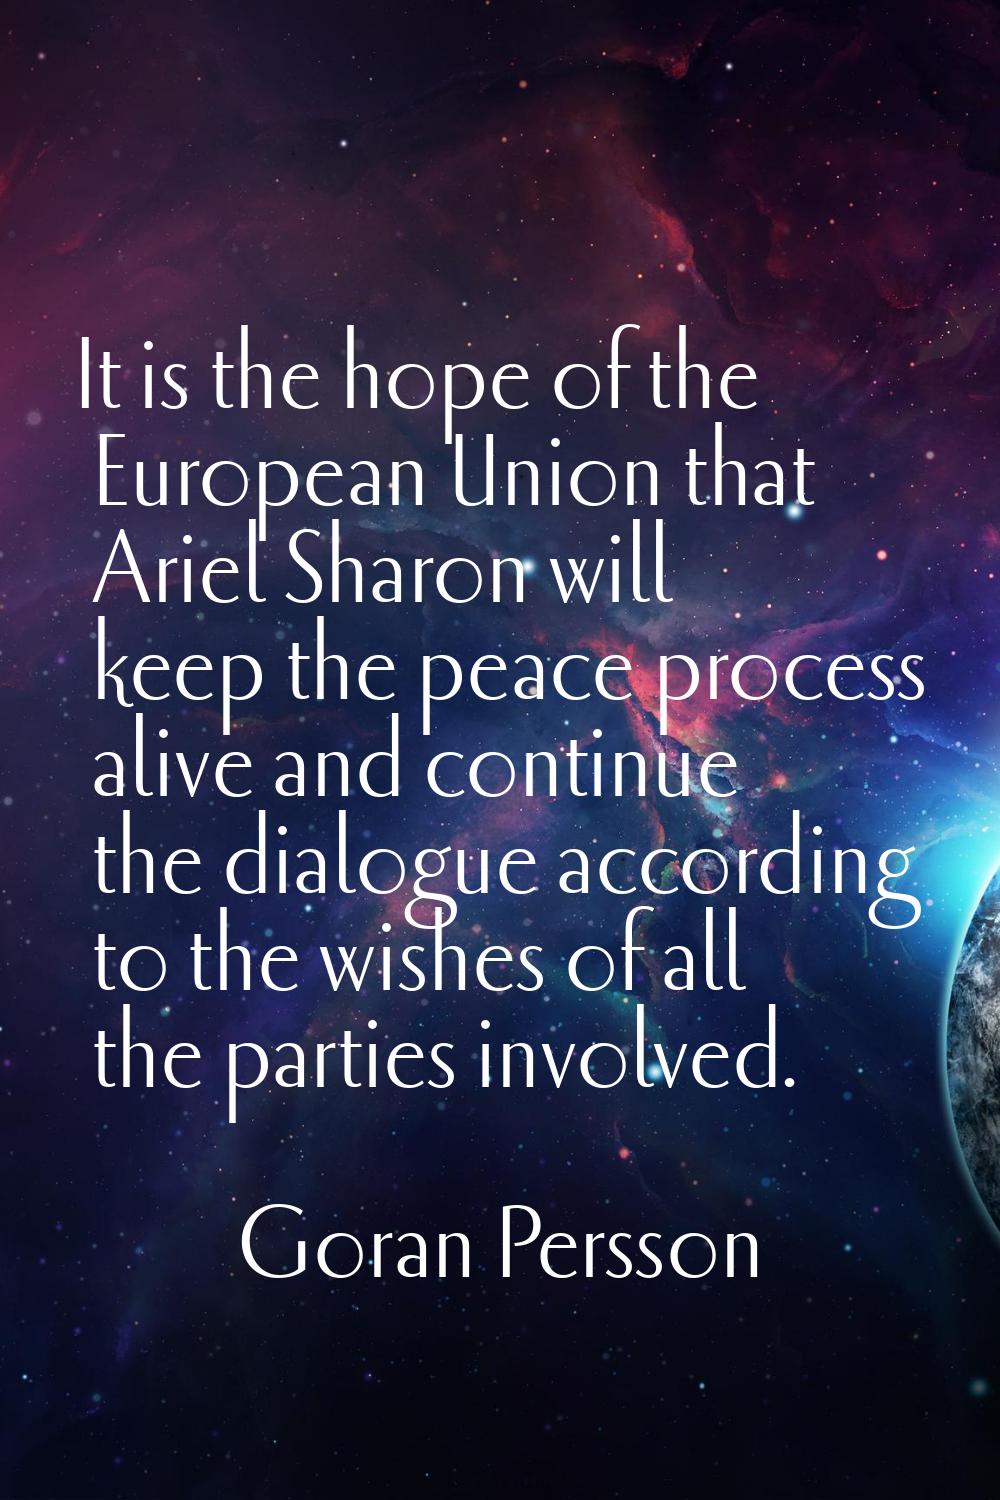 It is the hope of the European Union that Ariel Sharon will keep the peace process alive and contin